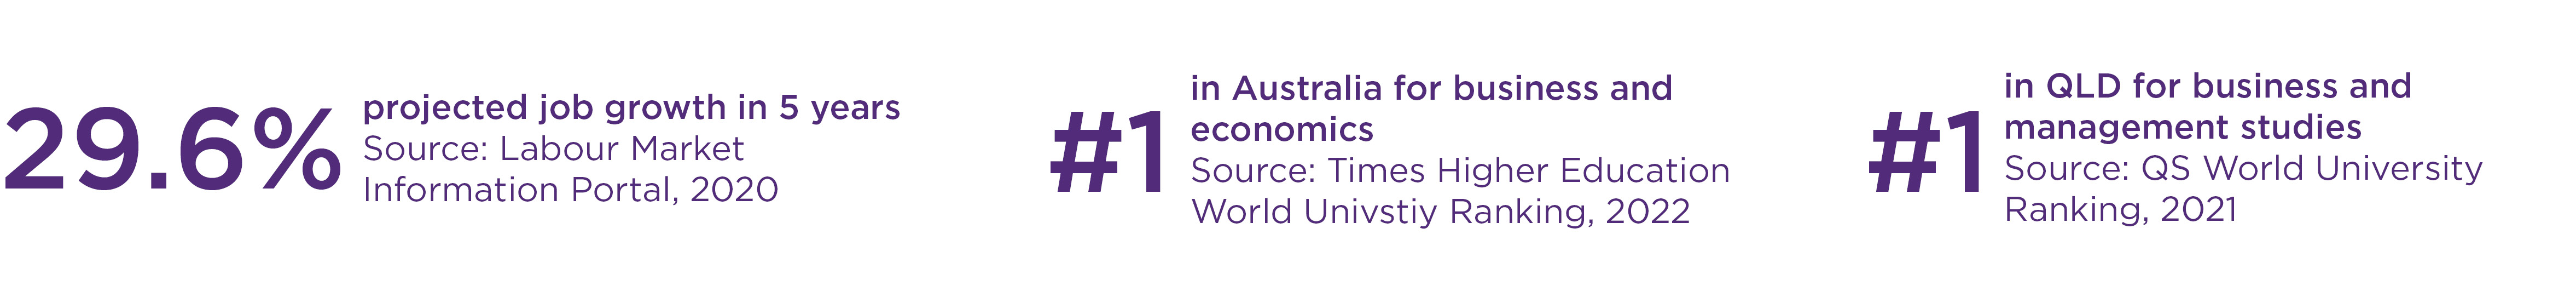 Why study business analytics? 29.6% projected job growth in 5 years, #1 in Australia for business and economics, #1 in QLD for business and management studies 